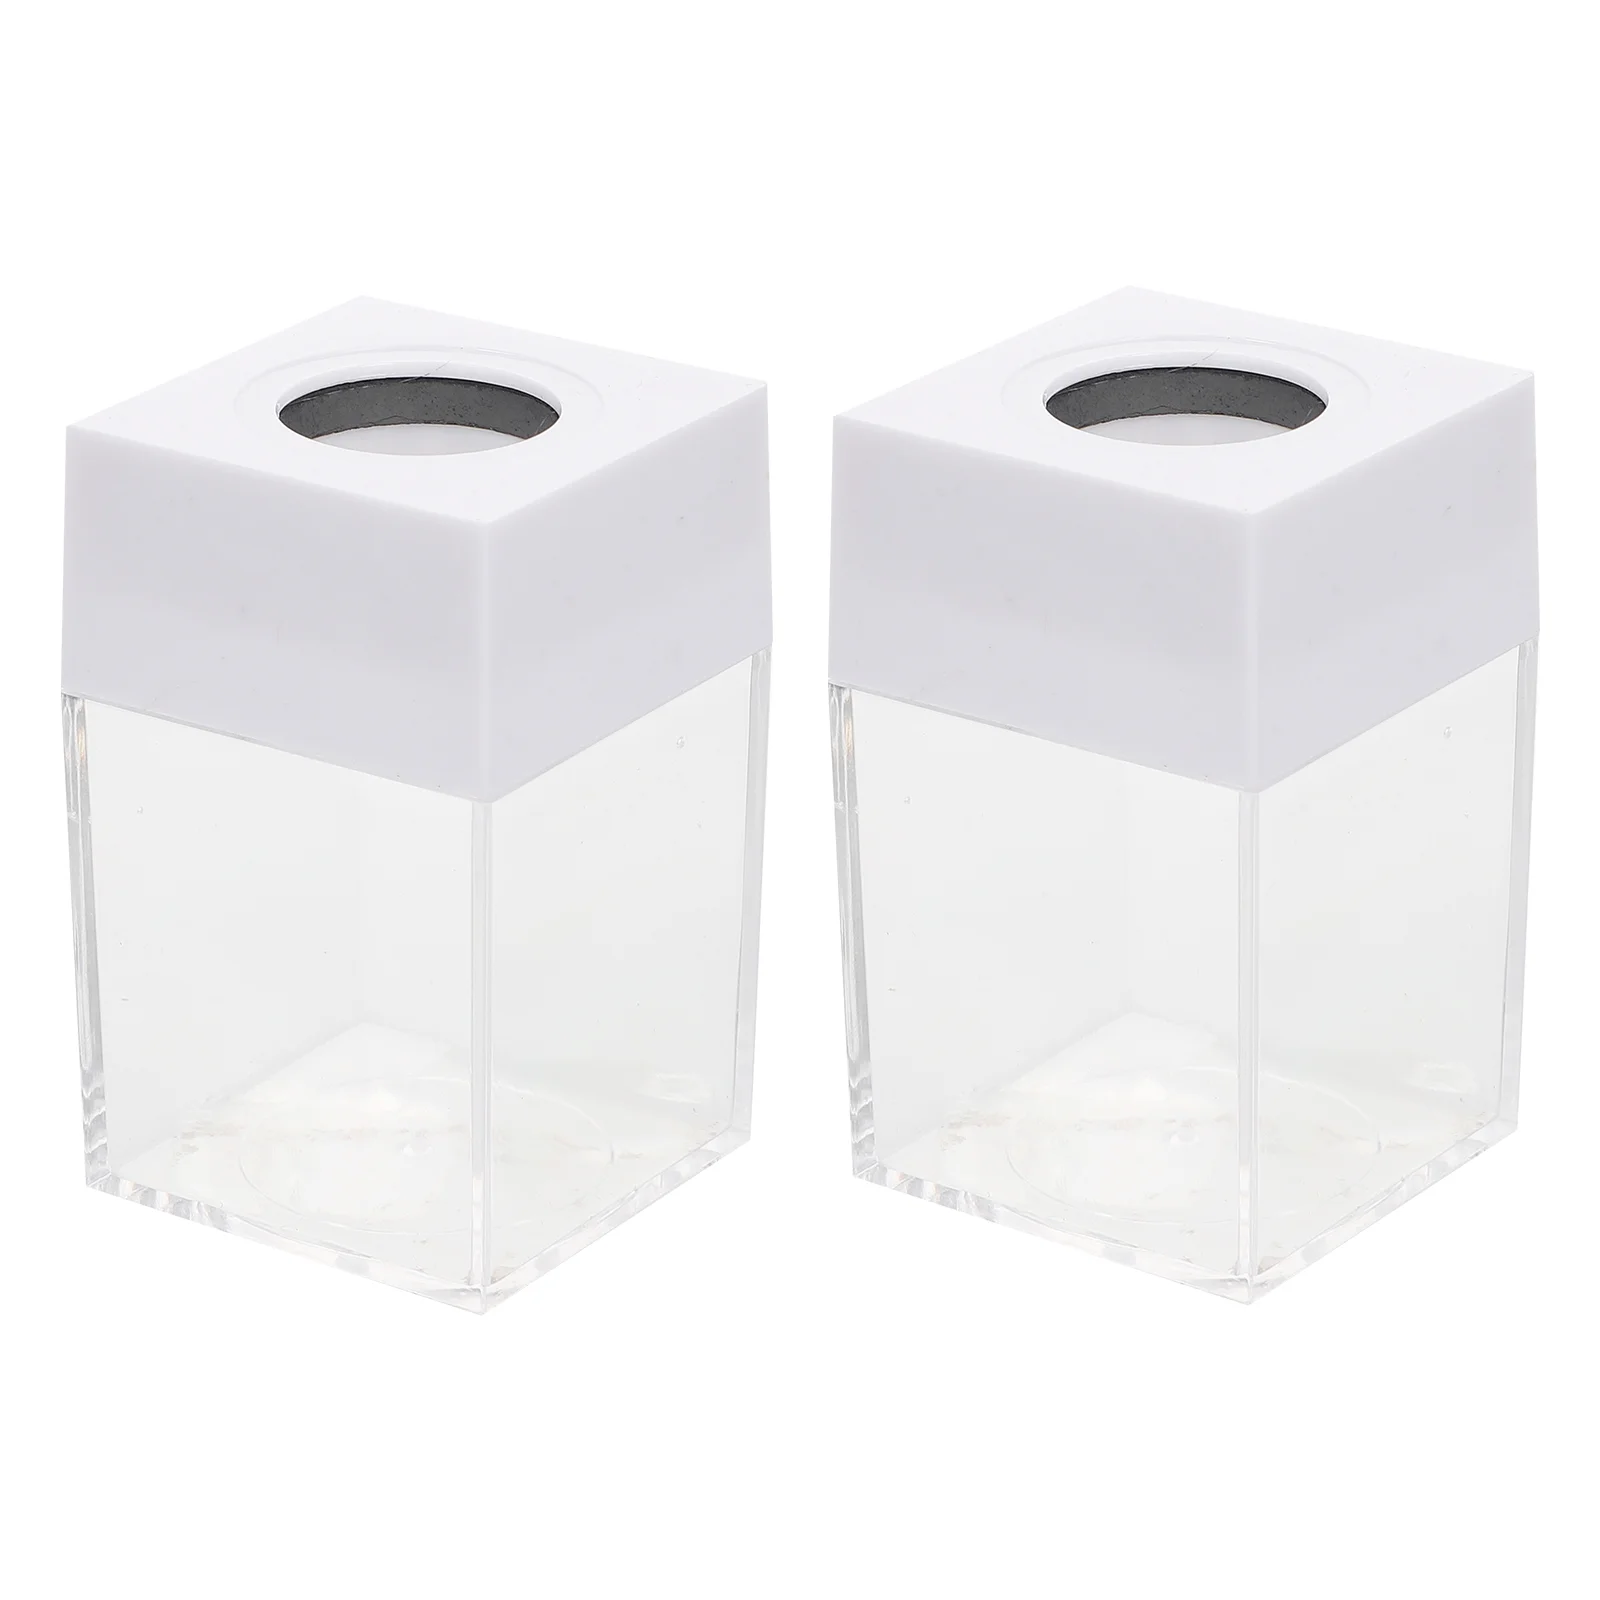 

2 Pcs Square Magnets Paper Clip Storage Bucket Multi-functional Organizers Transparent Desk Containers White Office